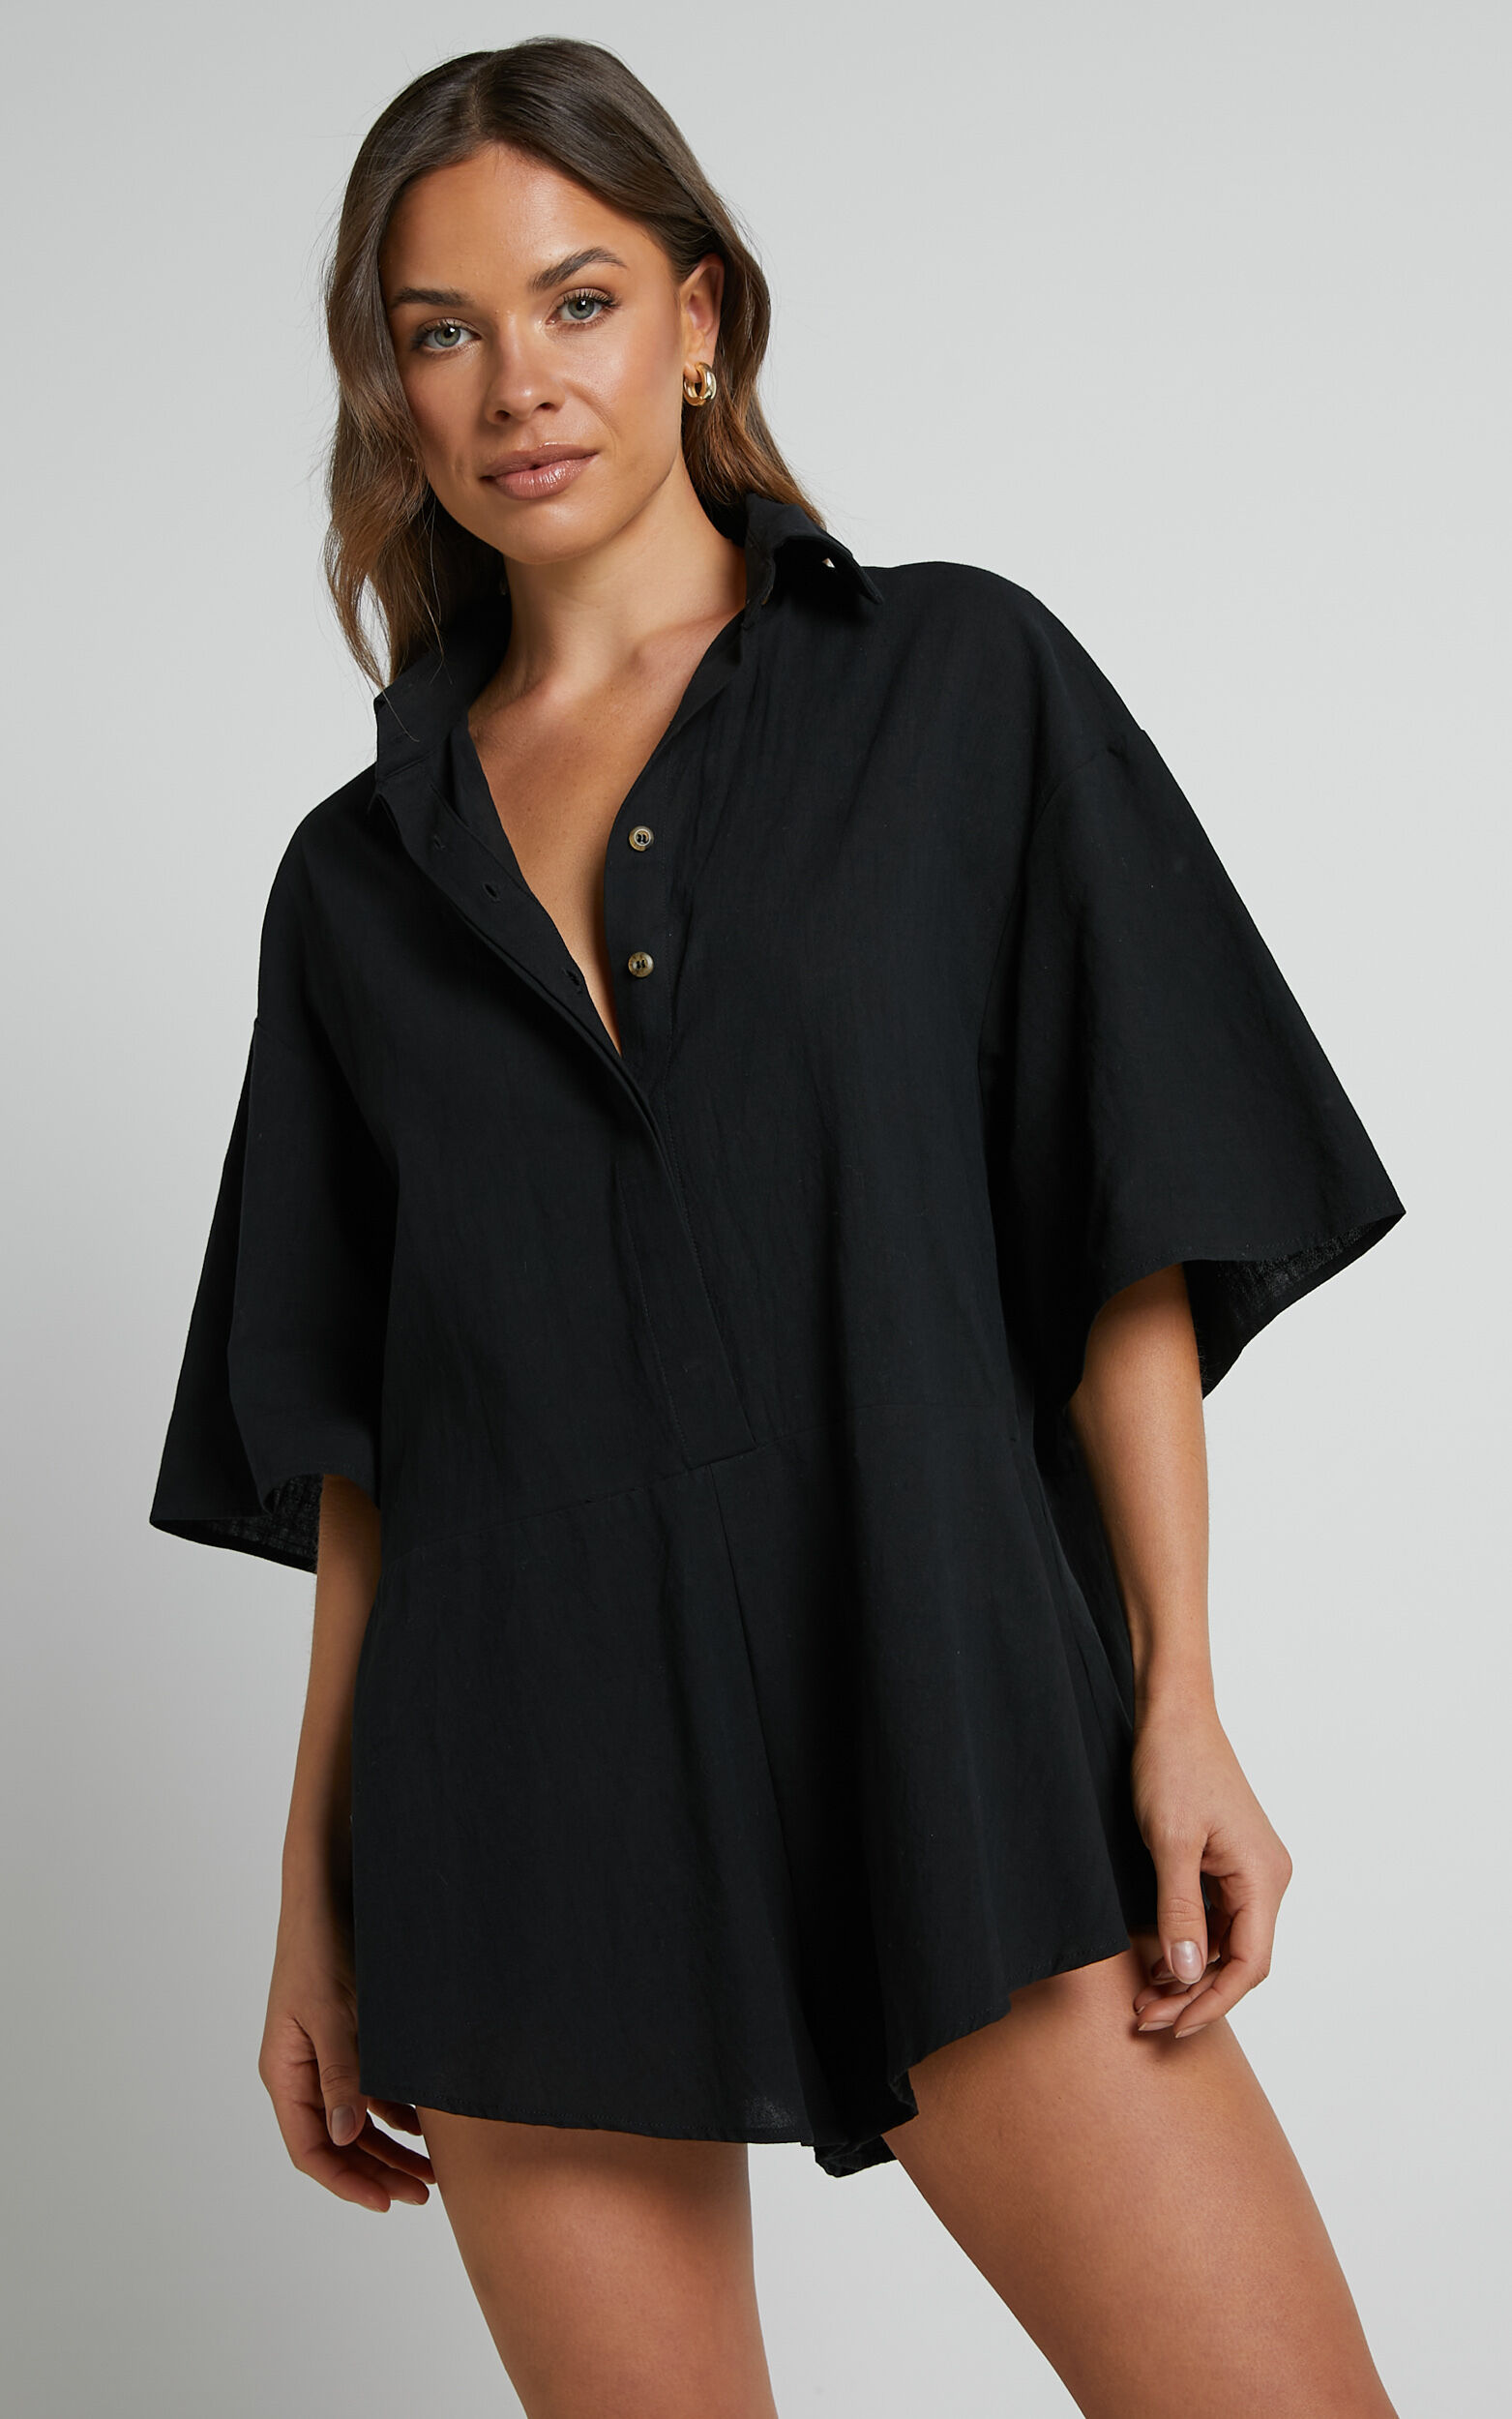 Ankana Playsuit - Short Sleeve Relaxed Button Front Playsuit in Black - 06, BLK1, super-hi-res image number null